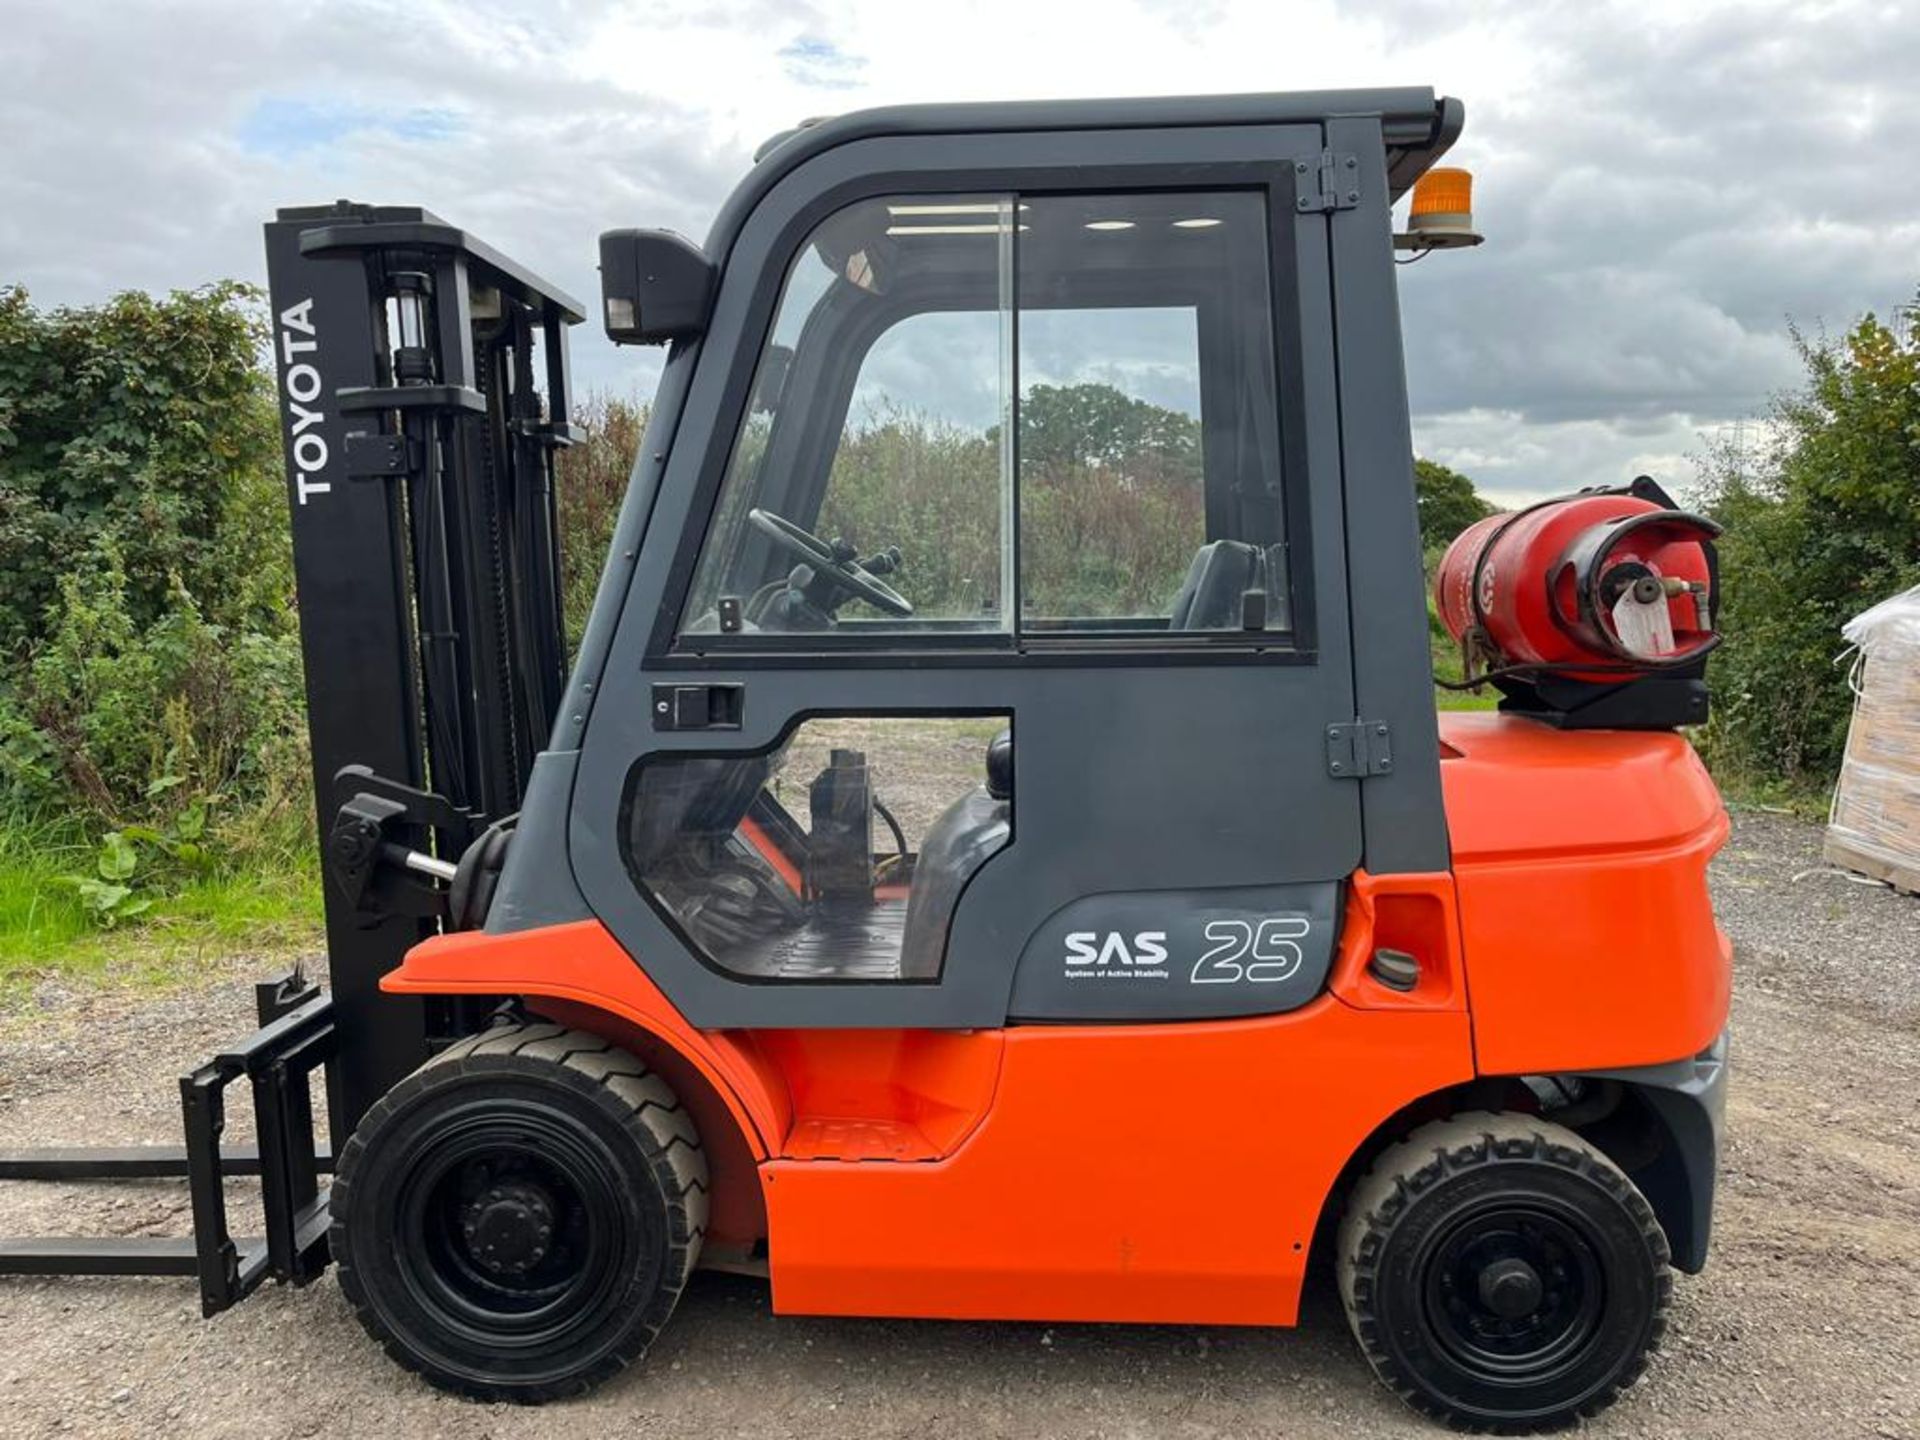 TOYOTA, 2.5 Tonne - Gas Forklift Truck - Image 2 of 11